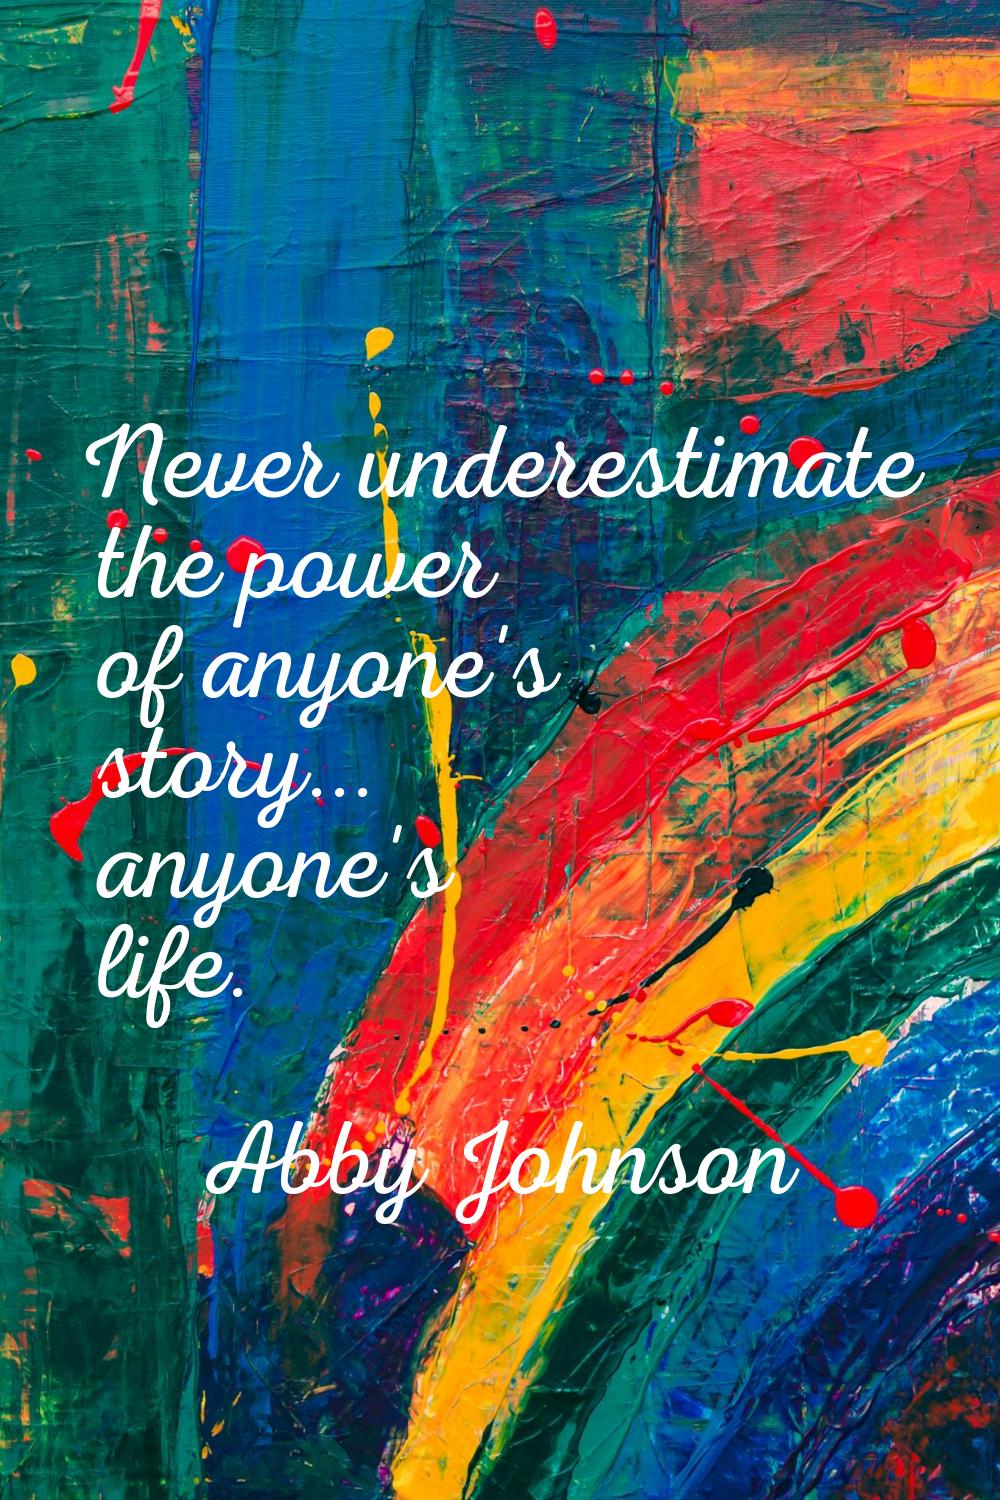 Never underestimate the power of anyone's story... anyone's life.